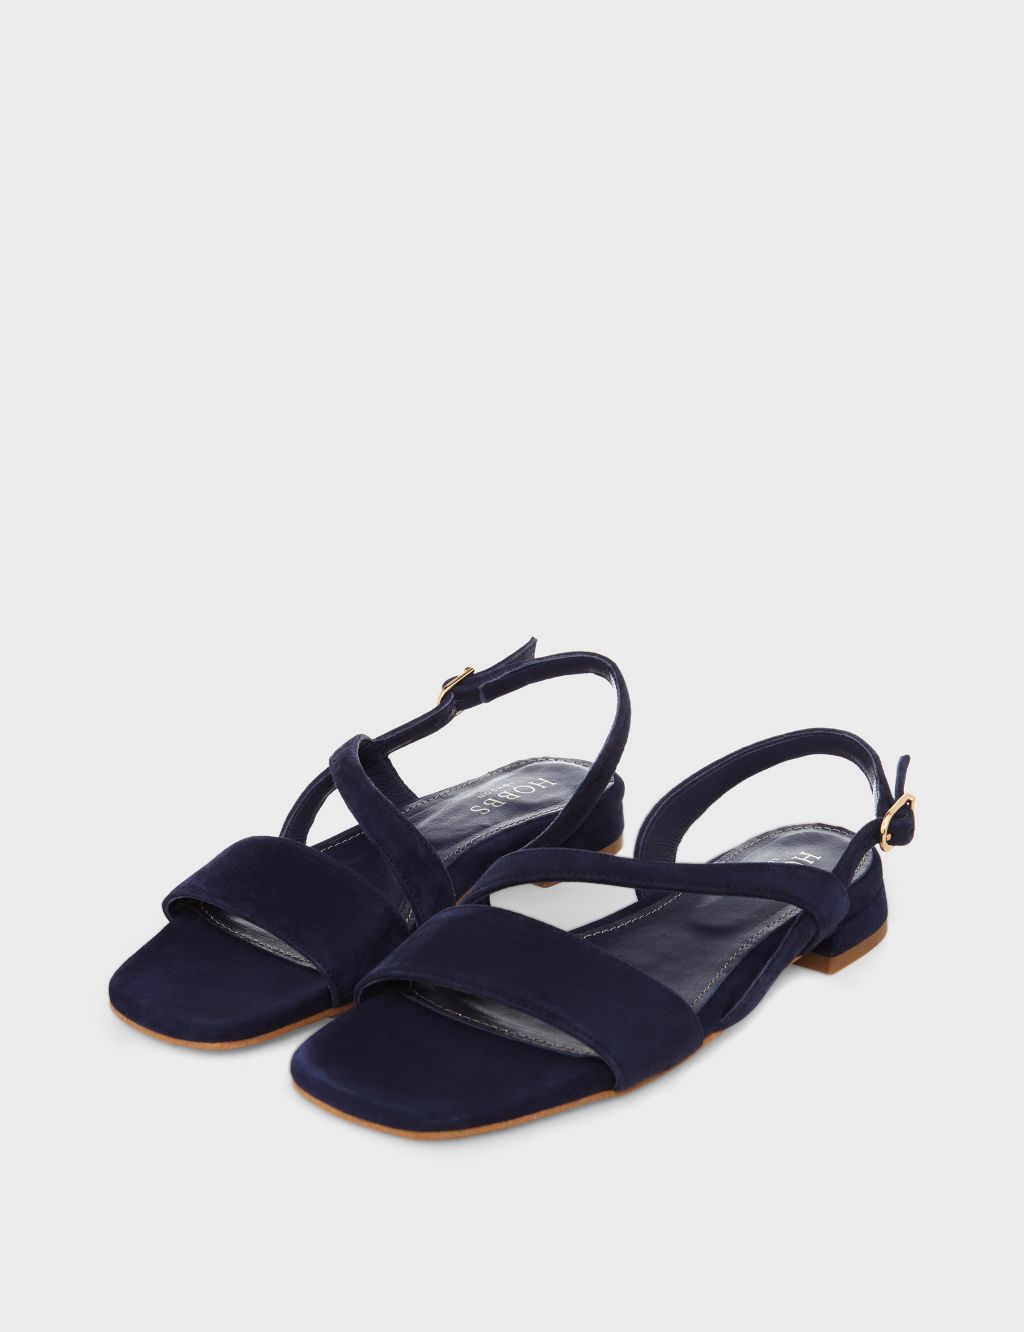 Suede Buckle Square Toe Sandals image 2